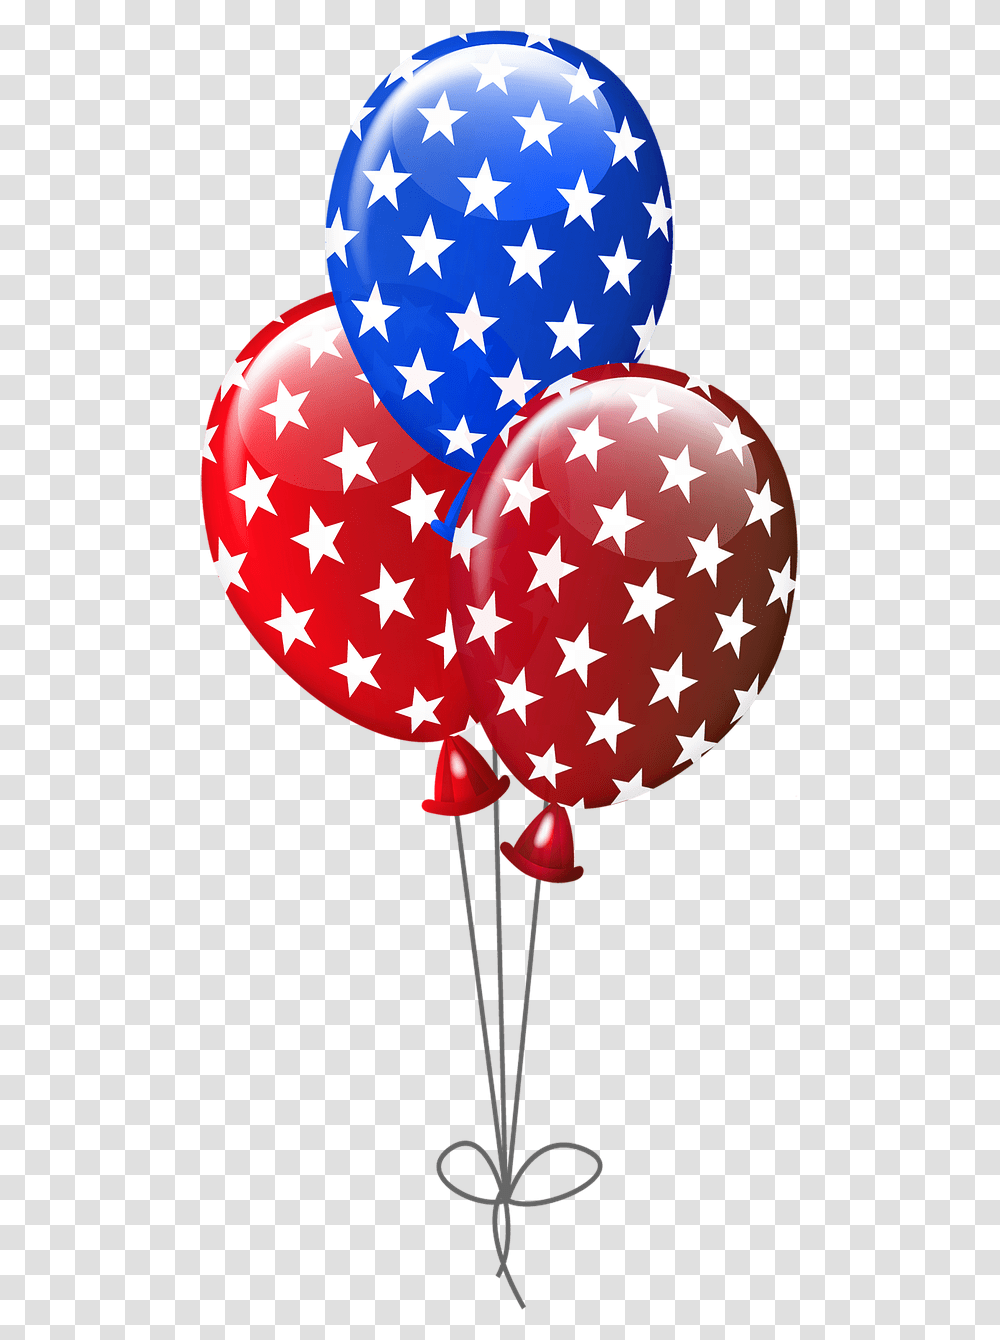 Balloons Blue Balloons Streamers Free Photo Red White And Blue Balloons Clipart Transparent Png